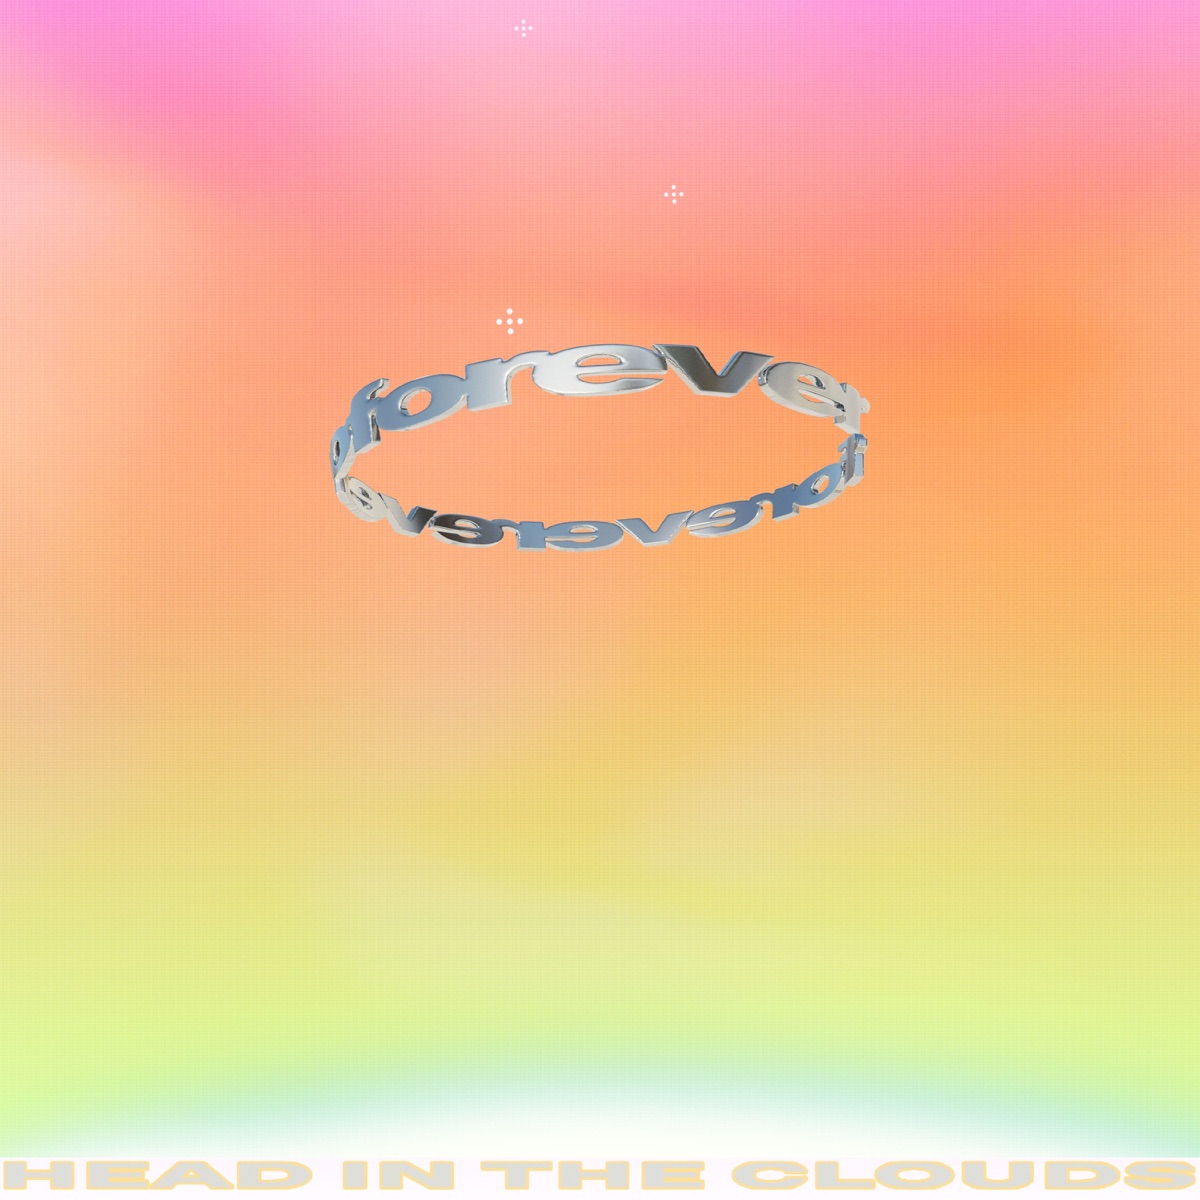 Cover for『88rising, HIKARU UTADA, Warren Hue - T』from the release『Head In The Clouds Forever』